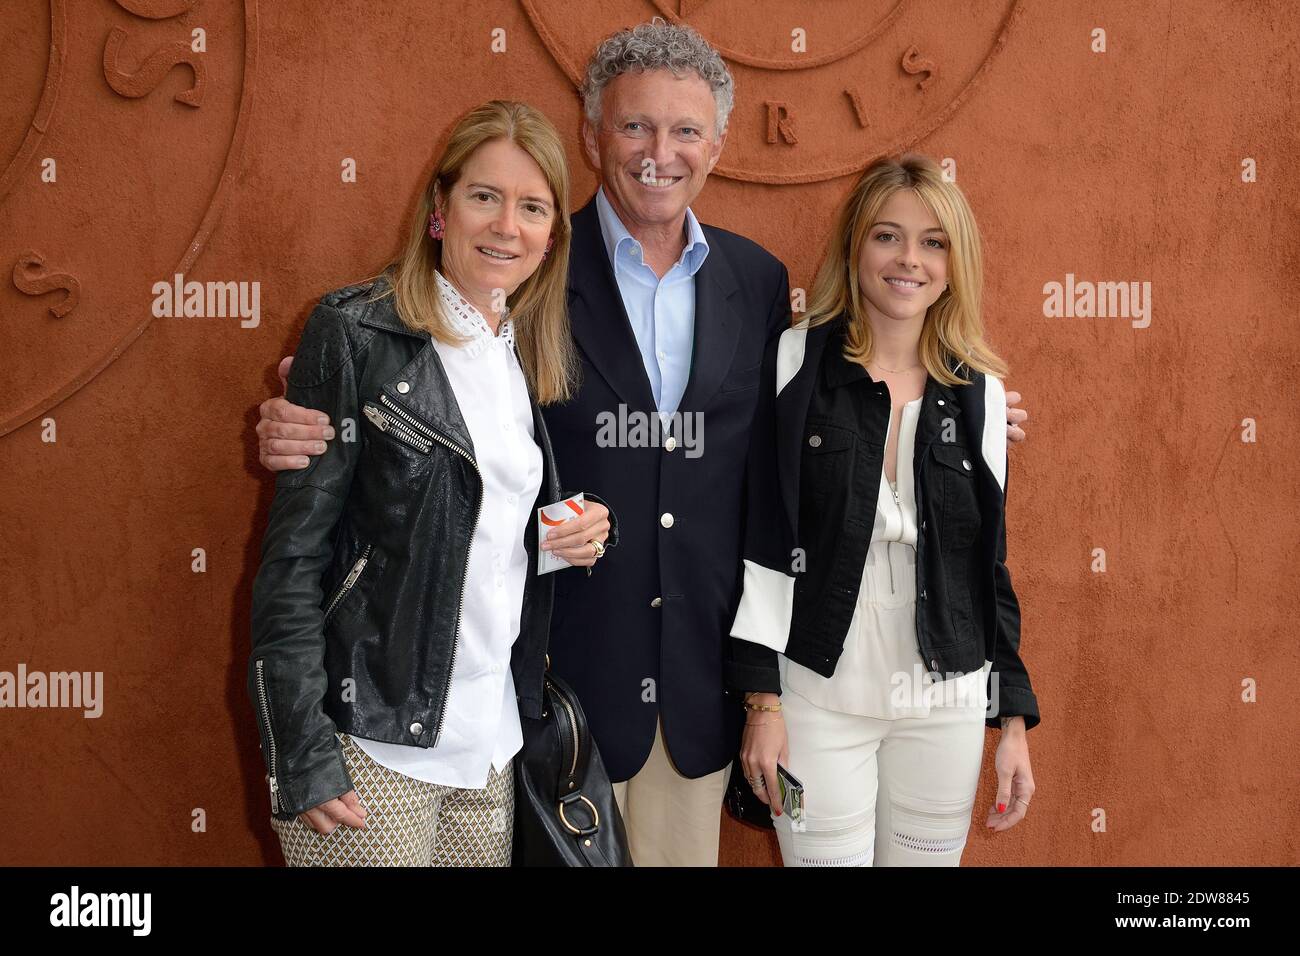 Nelson Monfort with his wife and his daughter Victoria Monfort stopping by  the Village, the VIP quarter of the French Tennis Open 2014 at Roland  Garros arena in Paris, France, on June